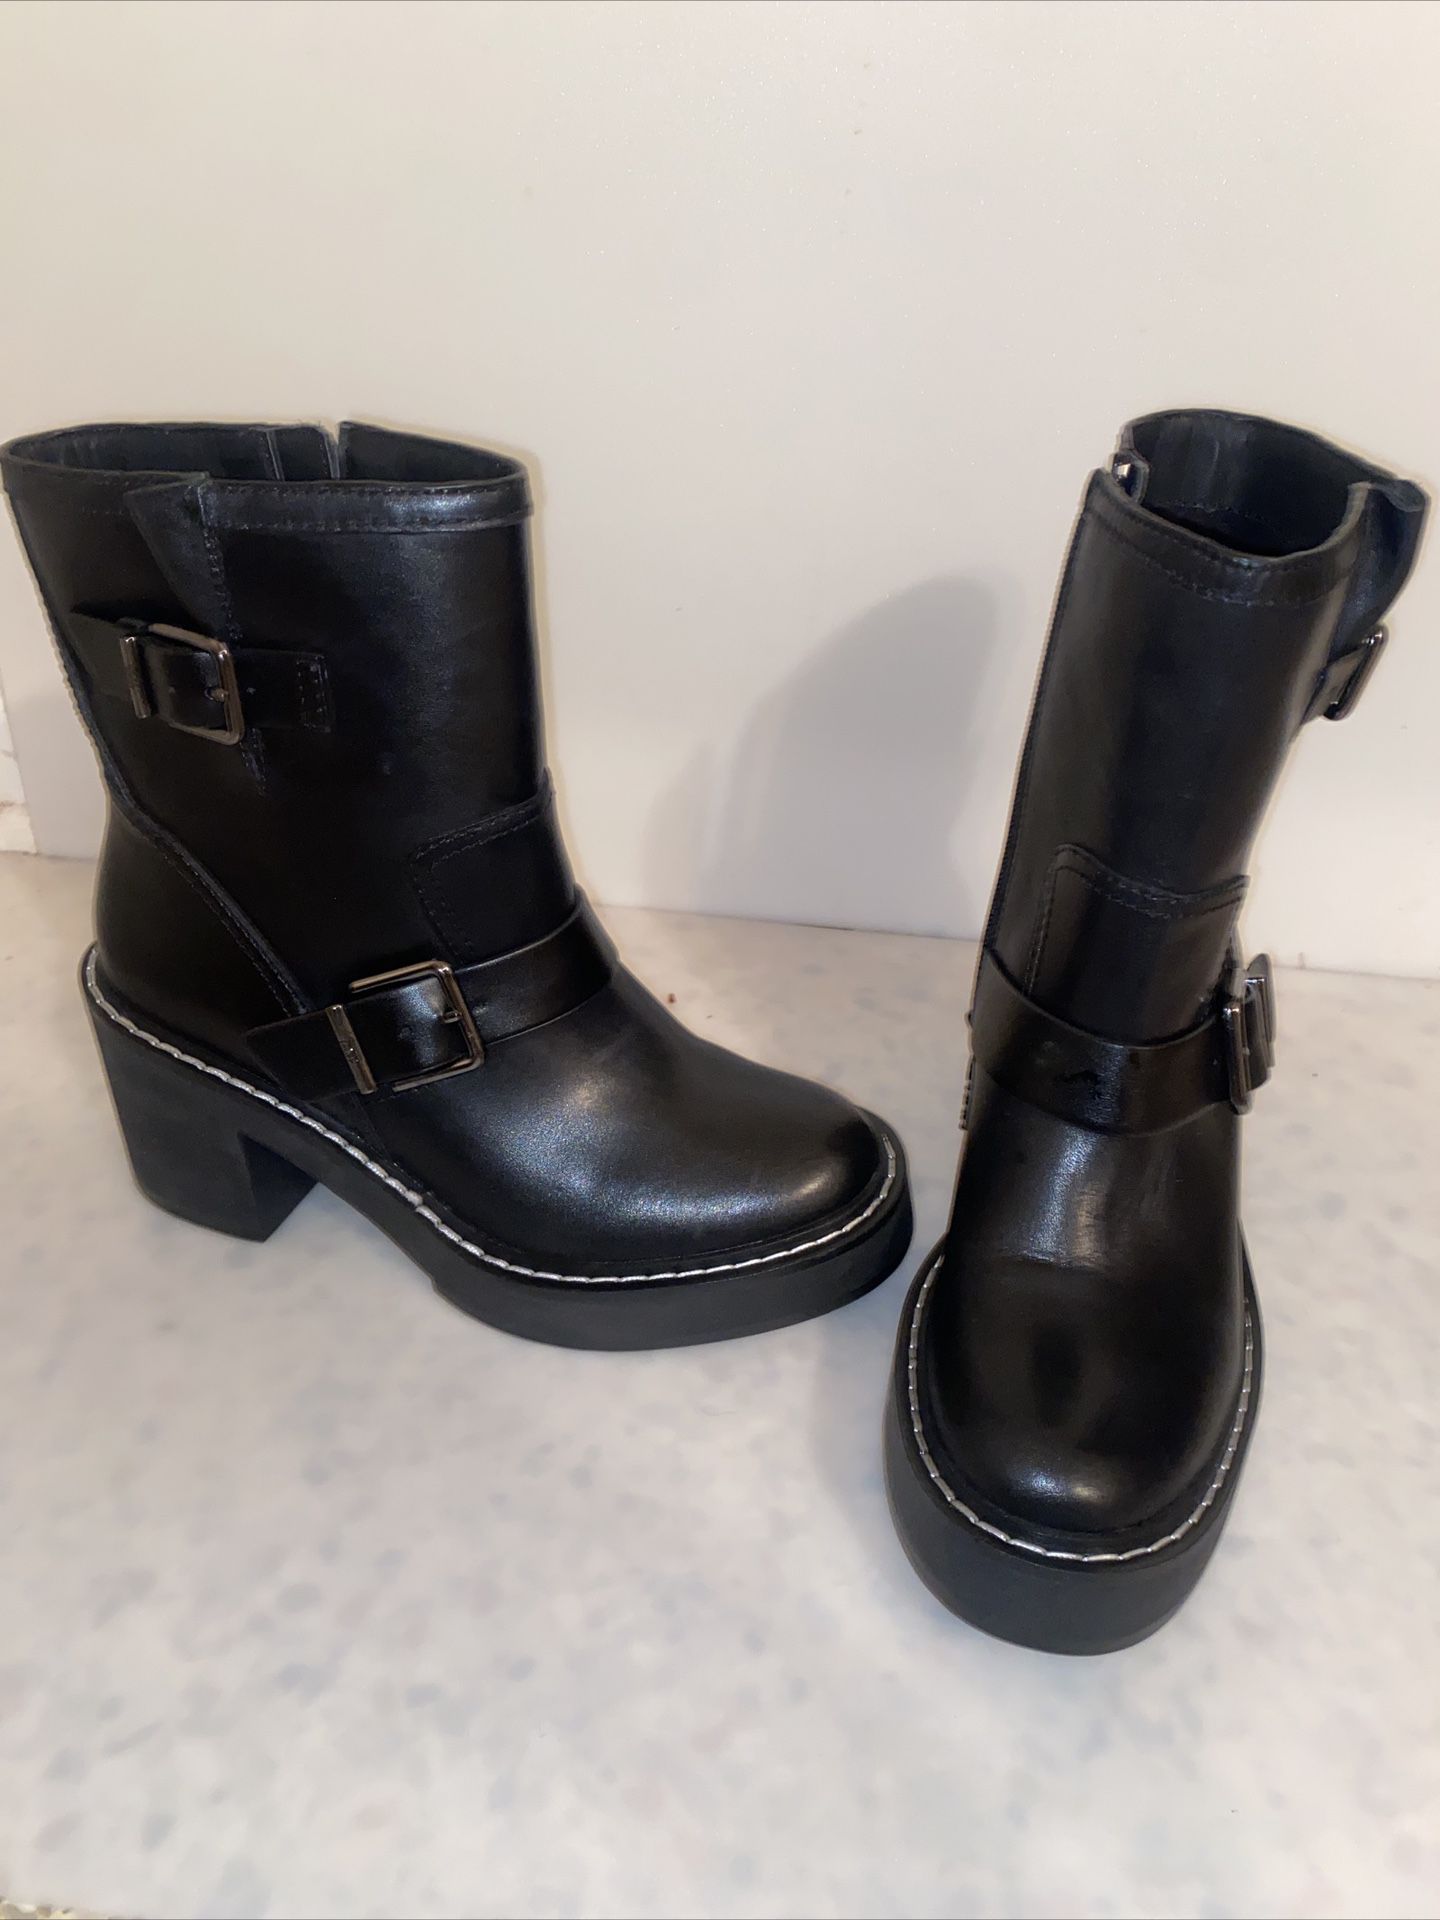 DKNY Womens Rainy 7.5 Cold Weather Ankle Winter & Snow Boots Shoes Zipper Black 